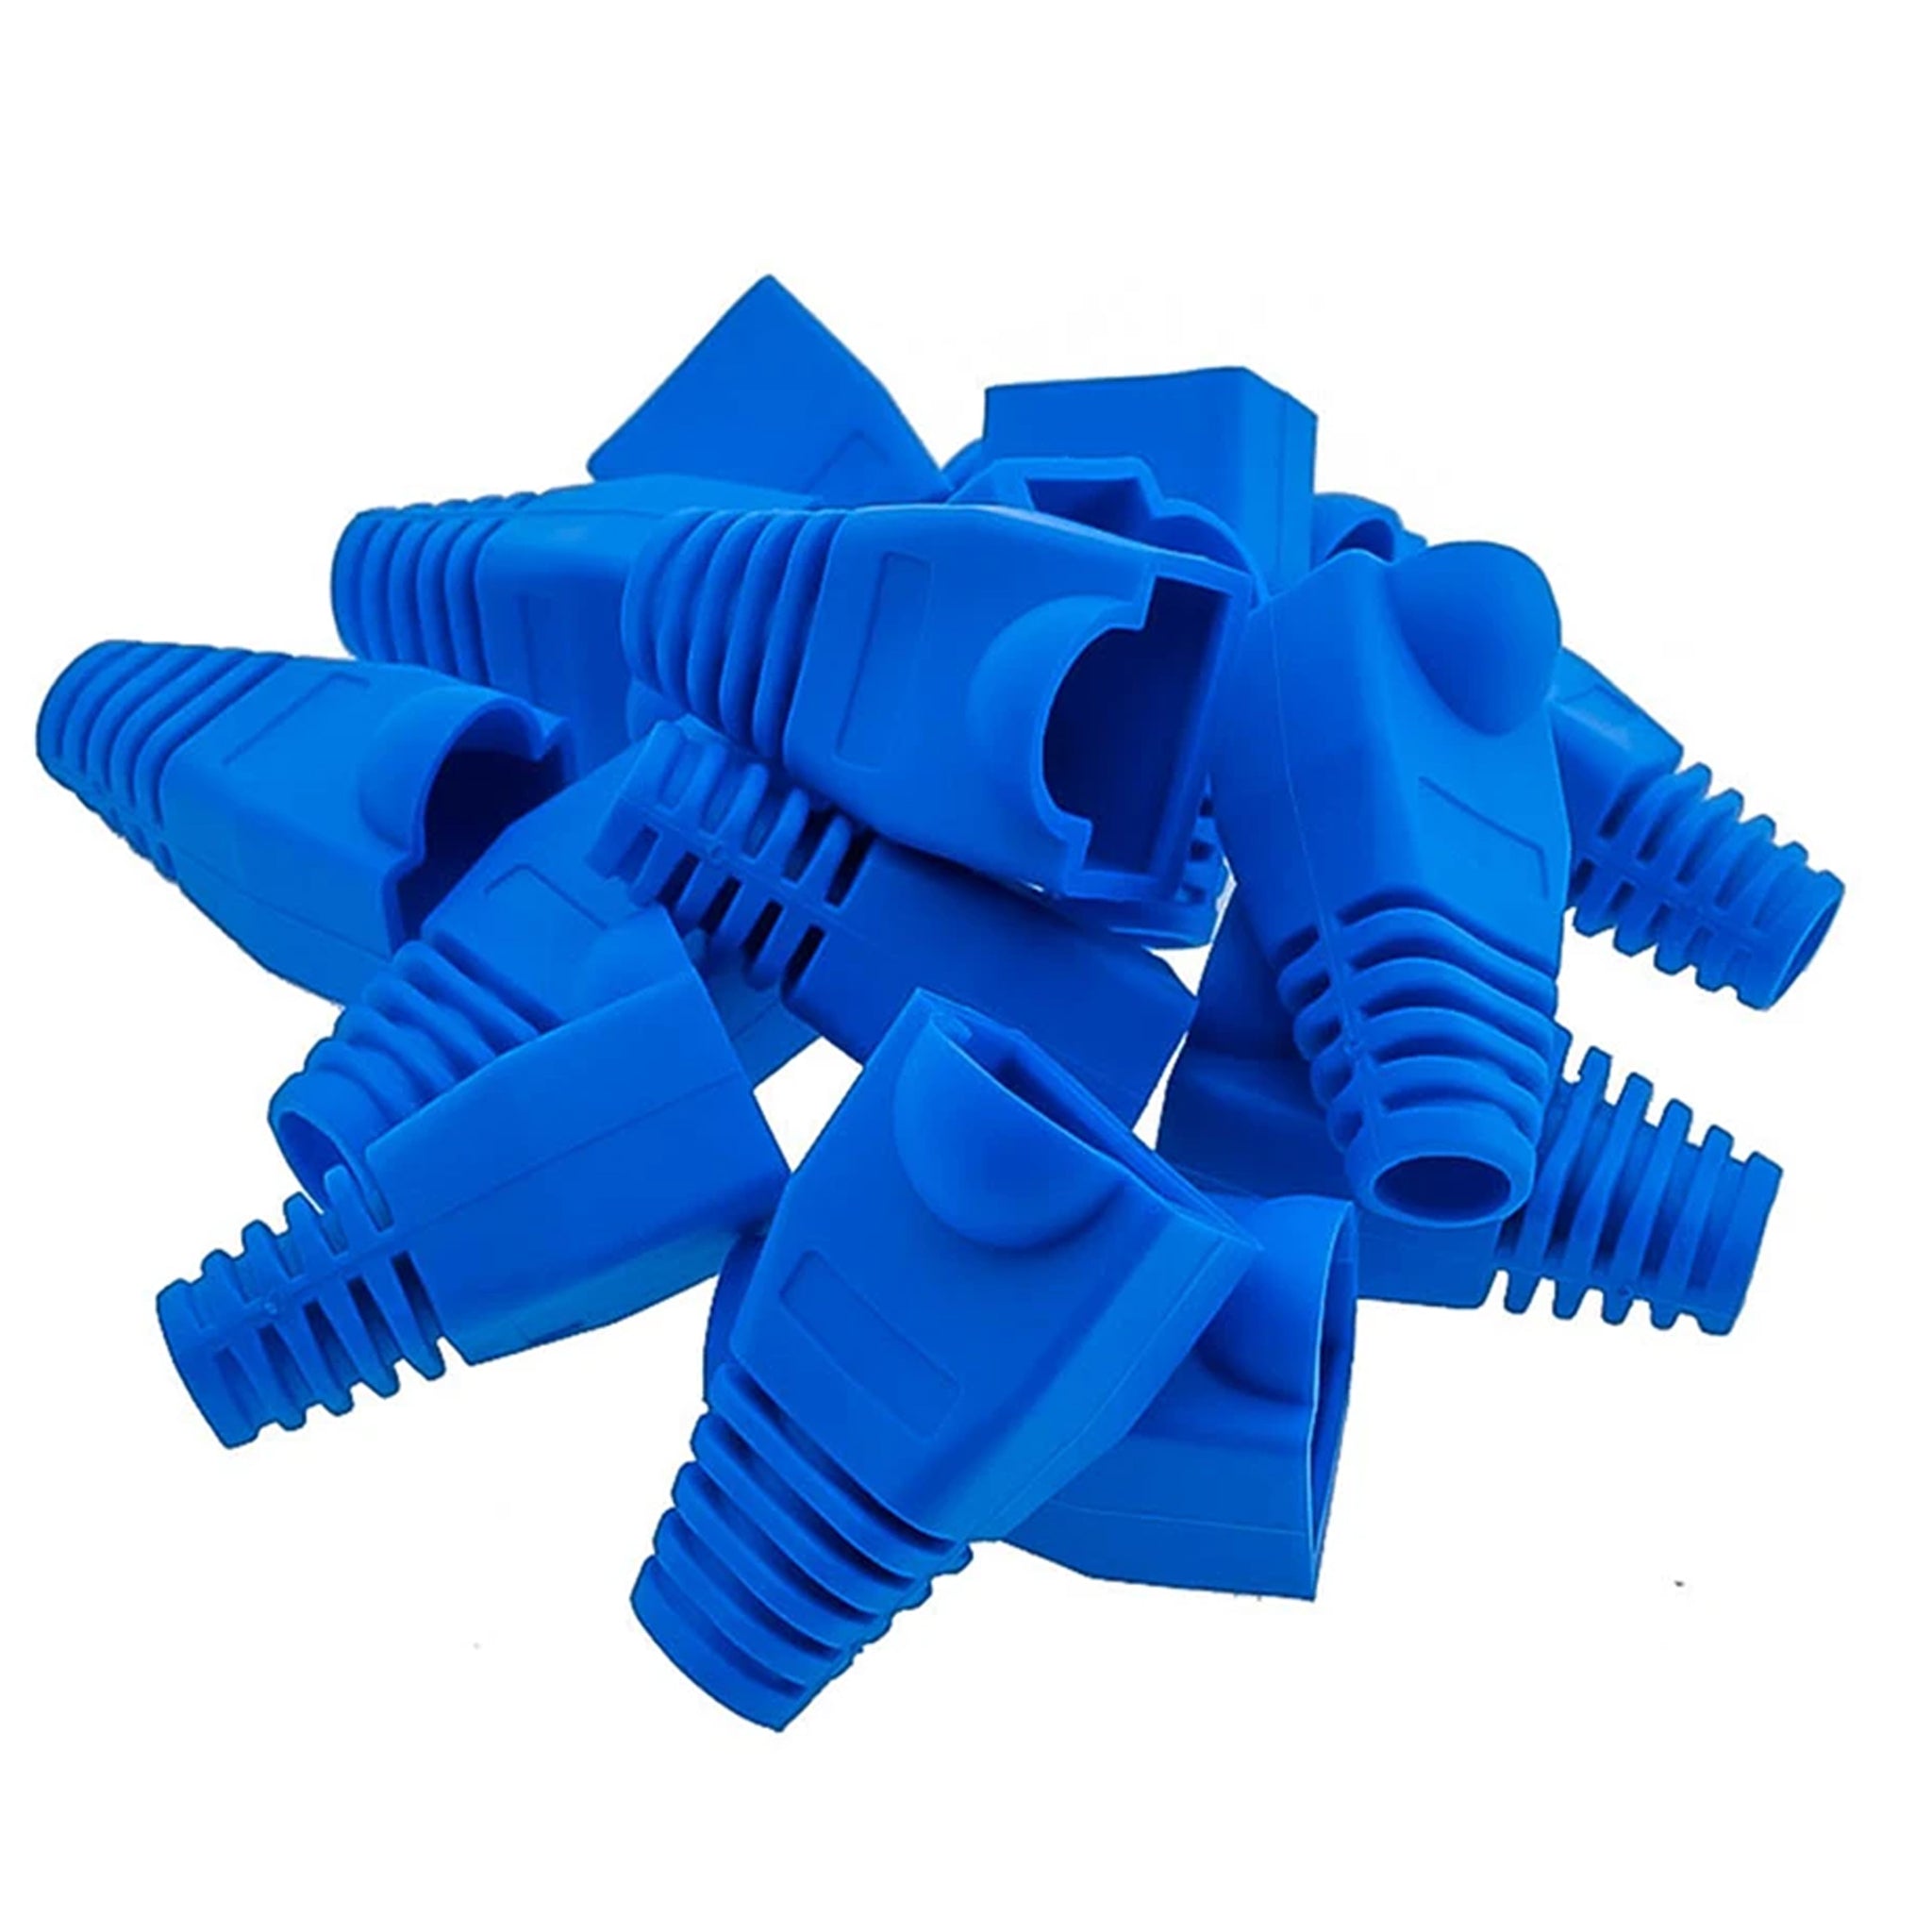 20x RJ45 Connector Boot For Cat5 Cat5e Cat6 Cate7 Strain Relief Rubber Boot Crimped Caps Covers Ethernet Network LAN Patch Cable Connector Boot Plug End Connectors Cover 20 BOOTS